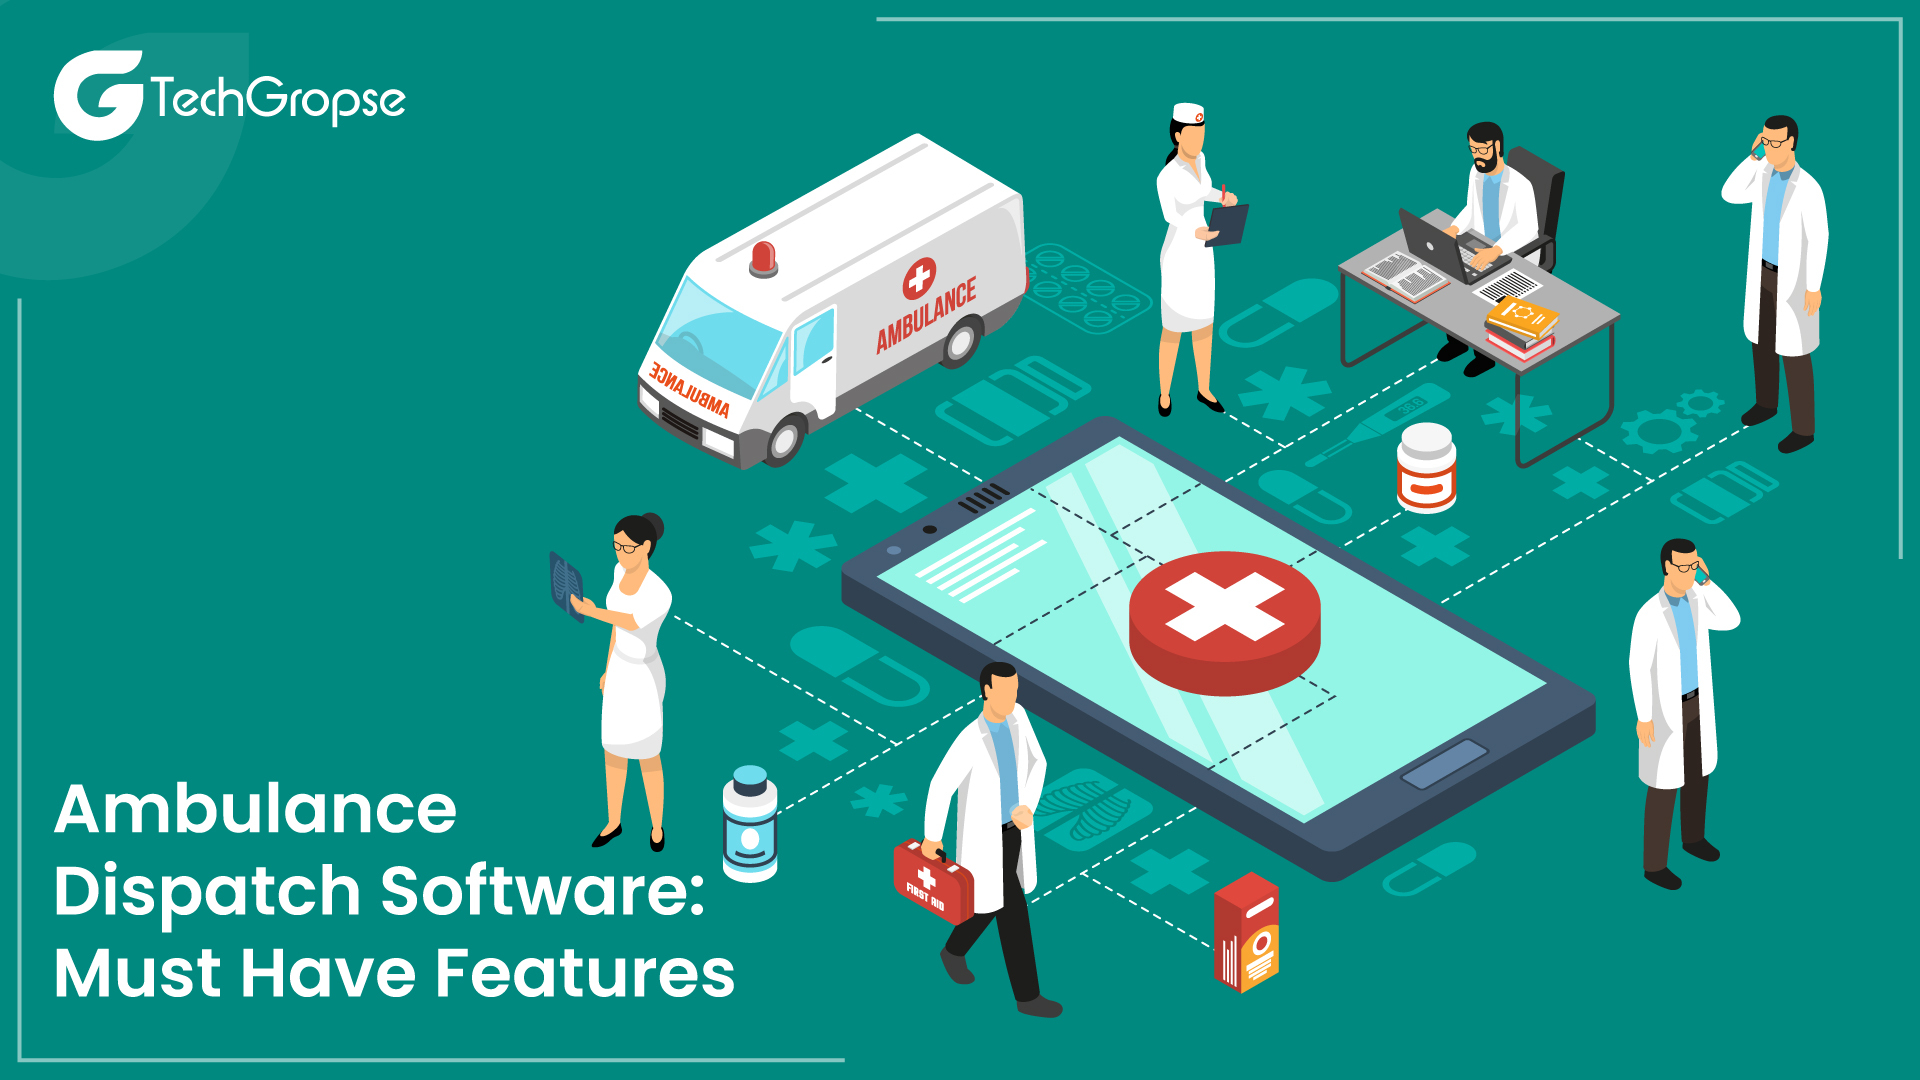 Ambulance Dispatch Software: Must Have Features